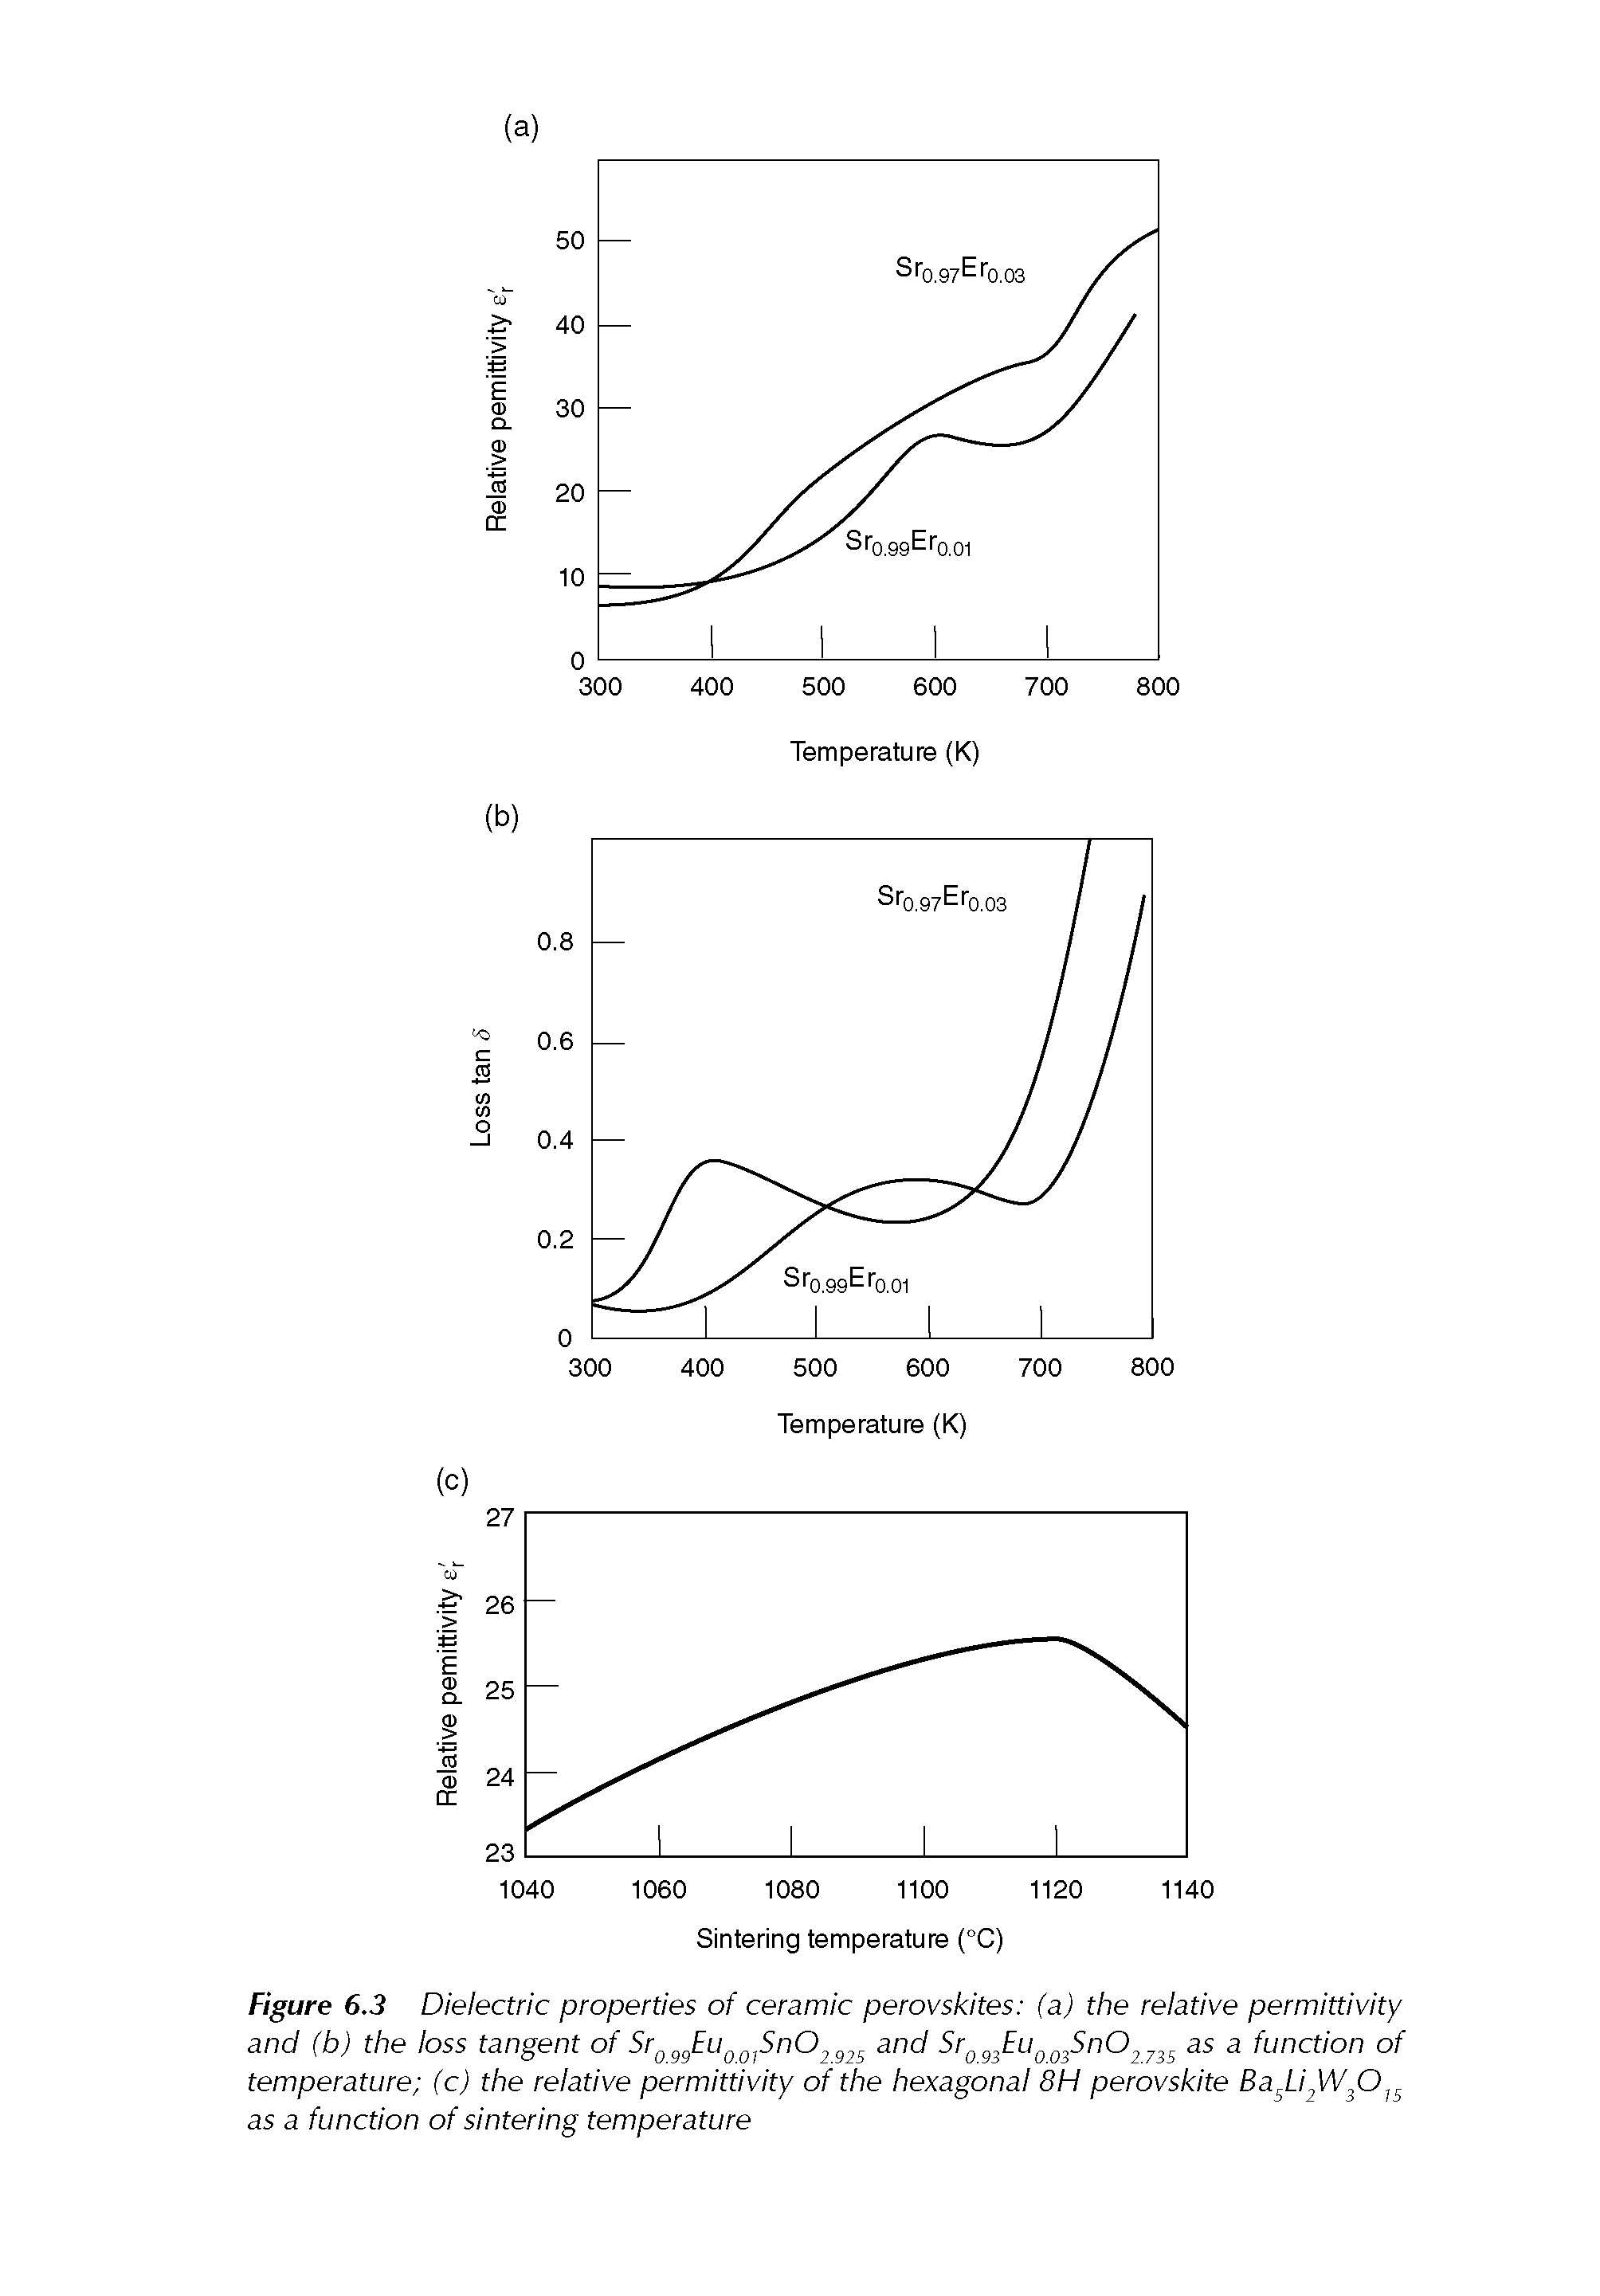 Figure 6.3 Dielectric properties of ceramic perovskites (a) the relative permittivity and (b) the loss tangent of Stg EUgg SnO g and StgggEUgggSnOg gg as a function of temperature (c) the relative permittivity of the hexagonal 8H perovskite BagLigWJD g as a function of sintering temperature...